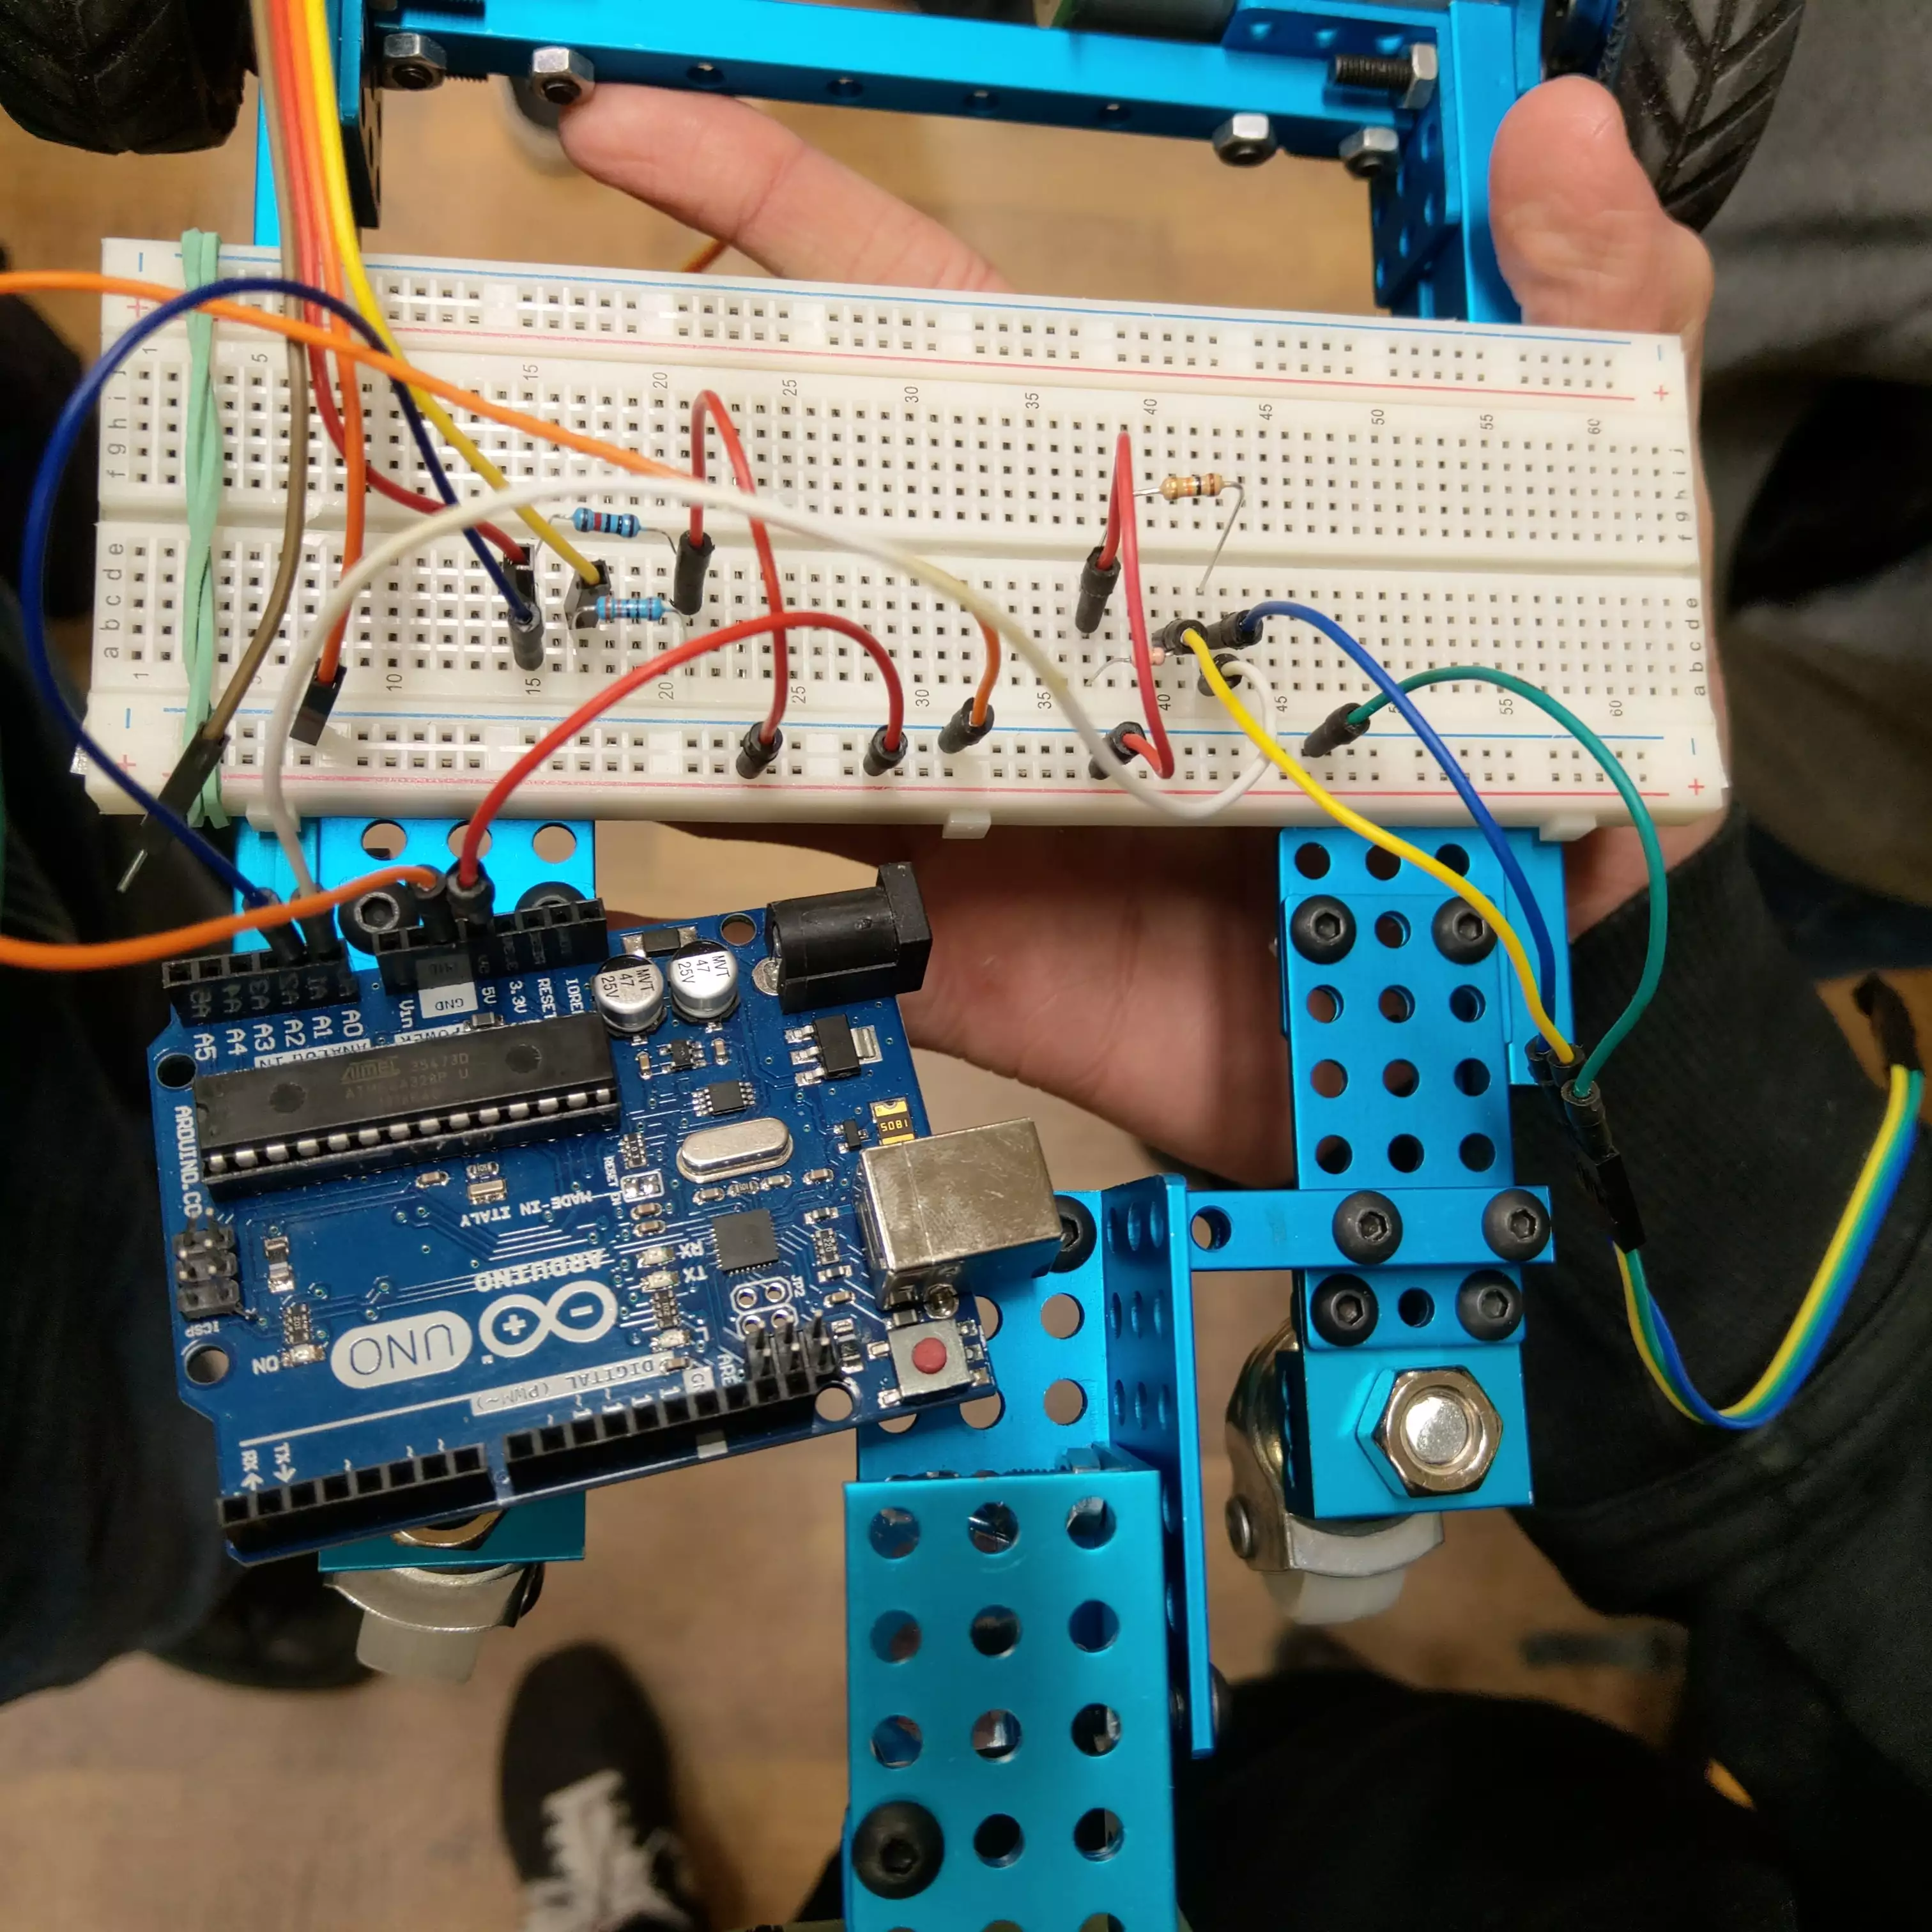 Arduino Uno board connected with breadboard using lots of jumpers. Breadboard connects with line sensors and has resistors pinned